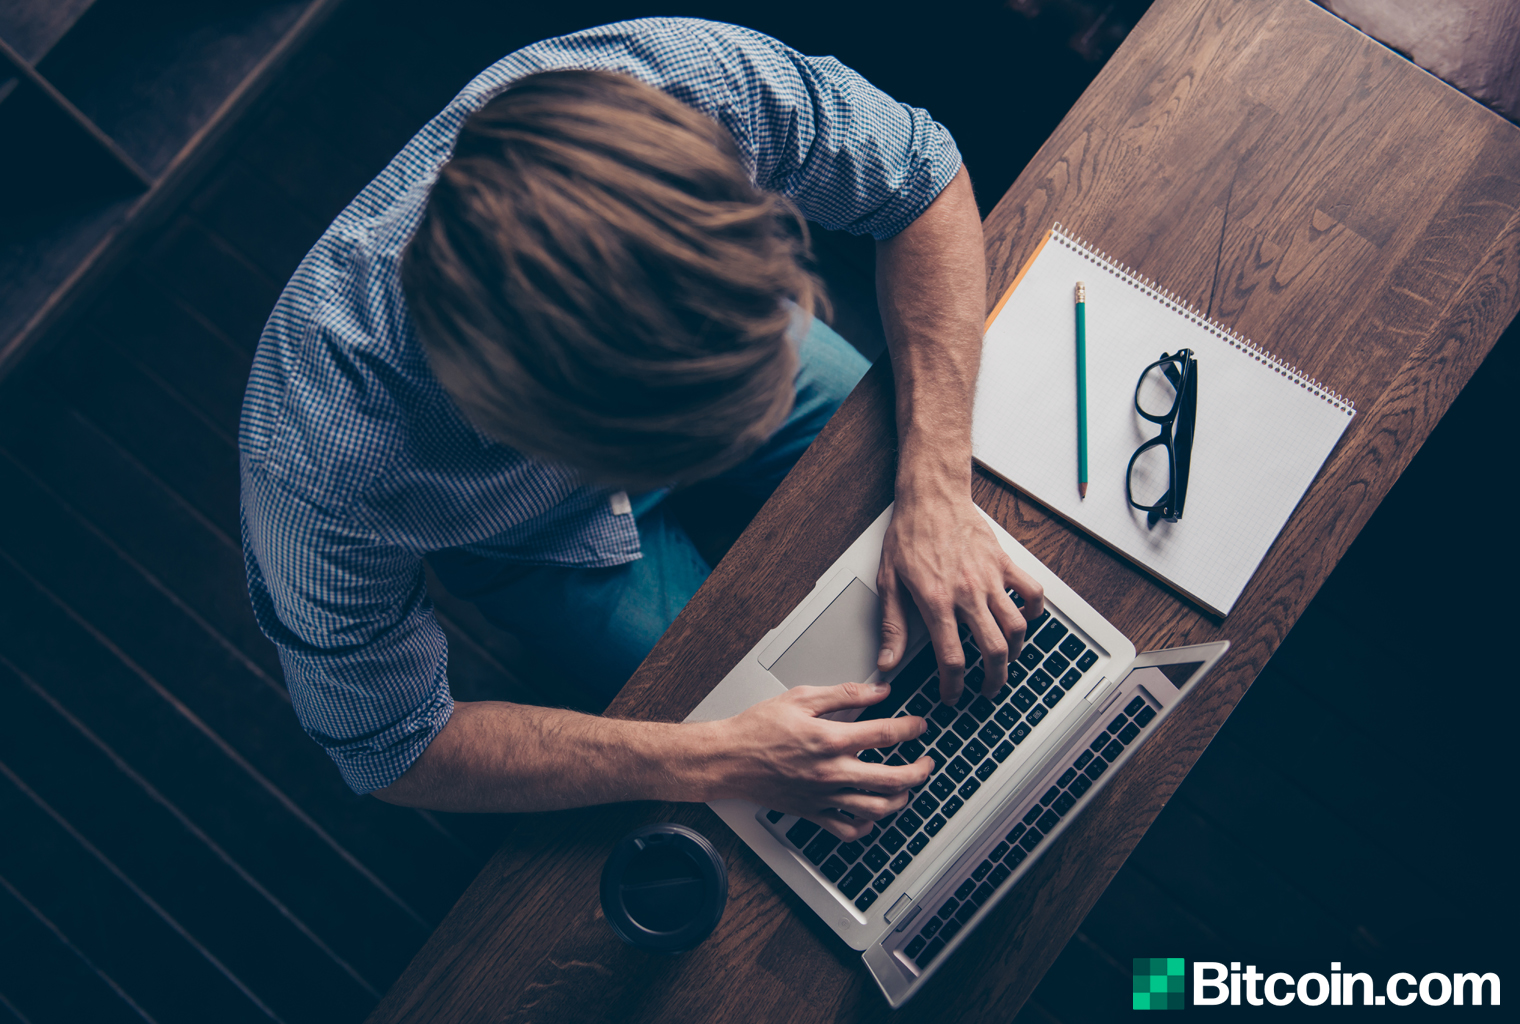 2 New Blog Sites That Allow Users to Earn Cryptocurrencies